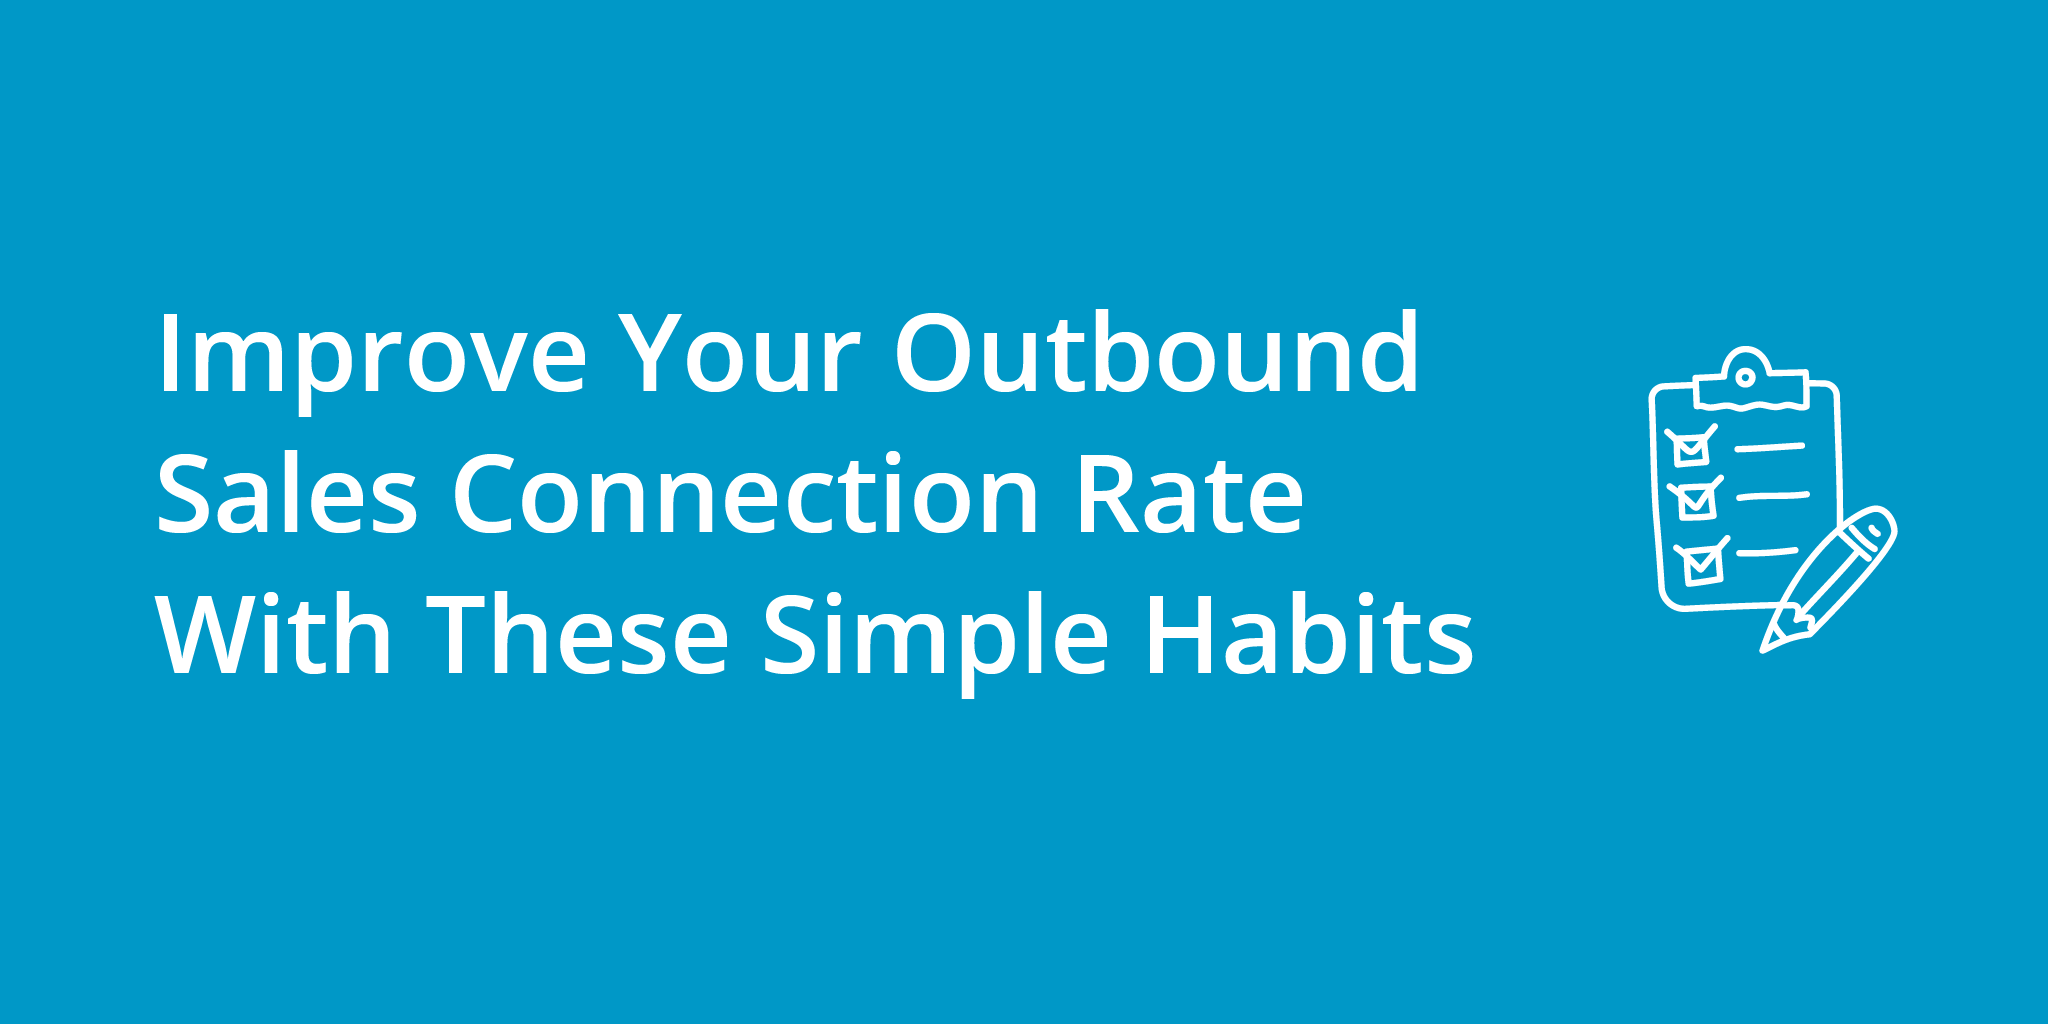 Improve Your Outbound Sales Connection Rate With These Simple Habits